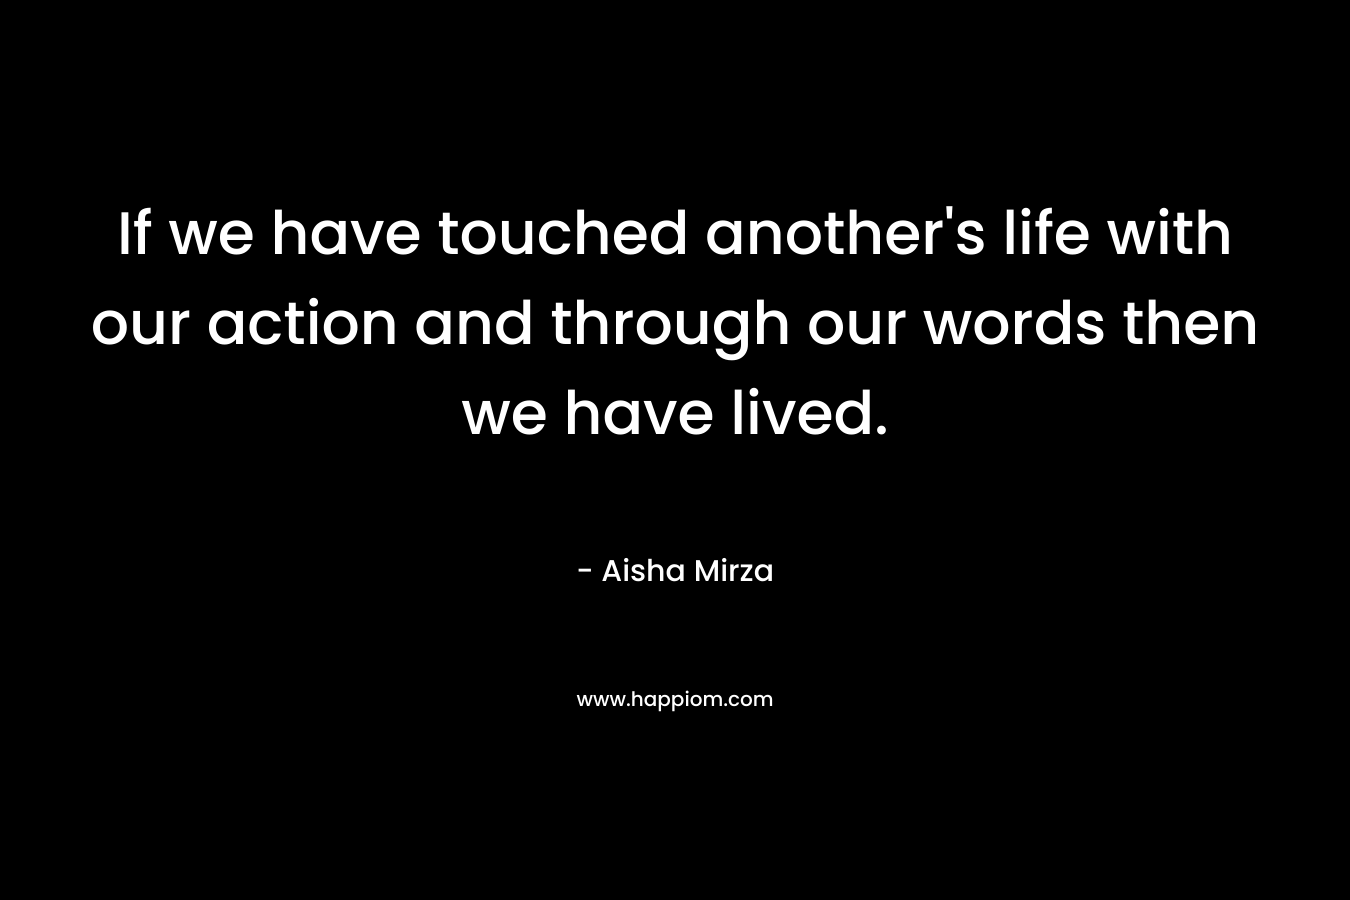 If we have touched another’s life with our action and through our words then we have lived. – Aisha Mirza